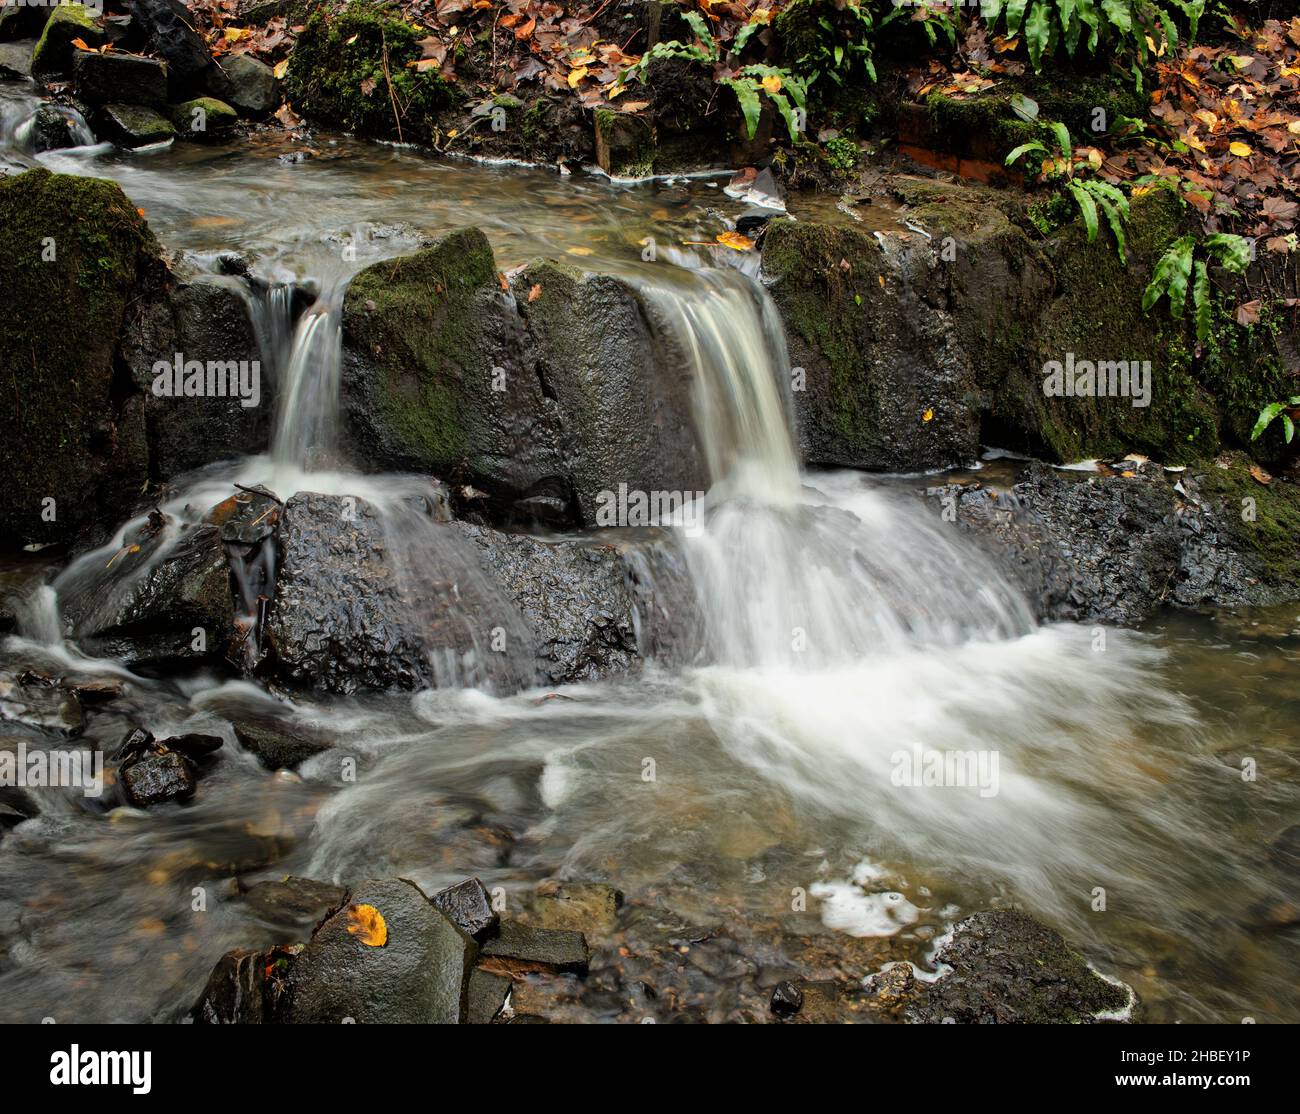 A twin waterfall in a small stream surrounded by fallen leaves in autumn Stock Photo